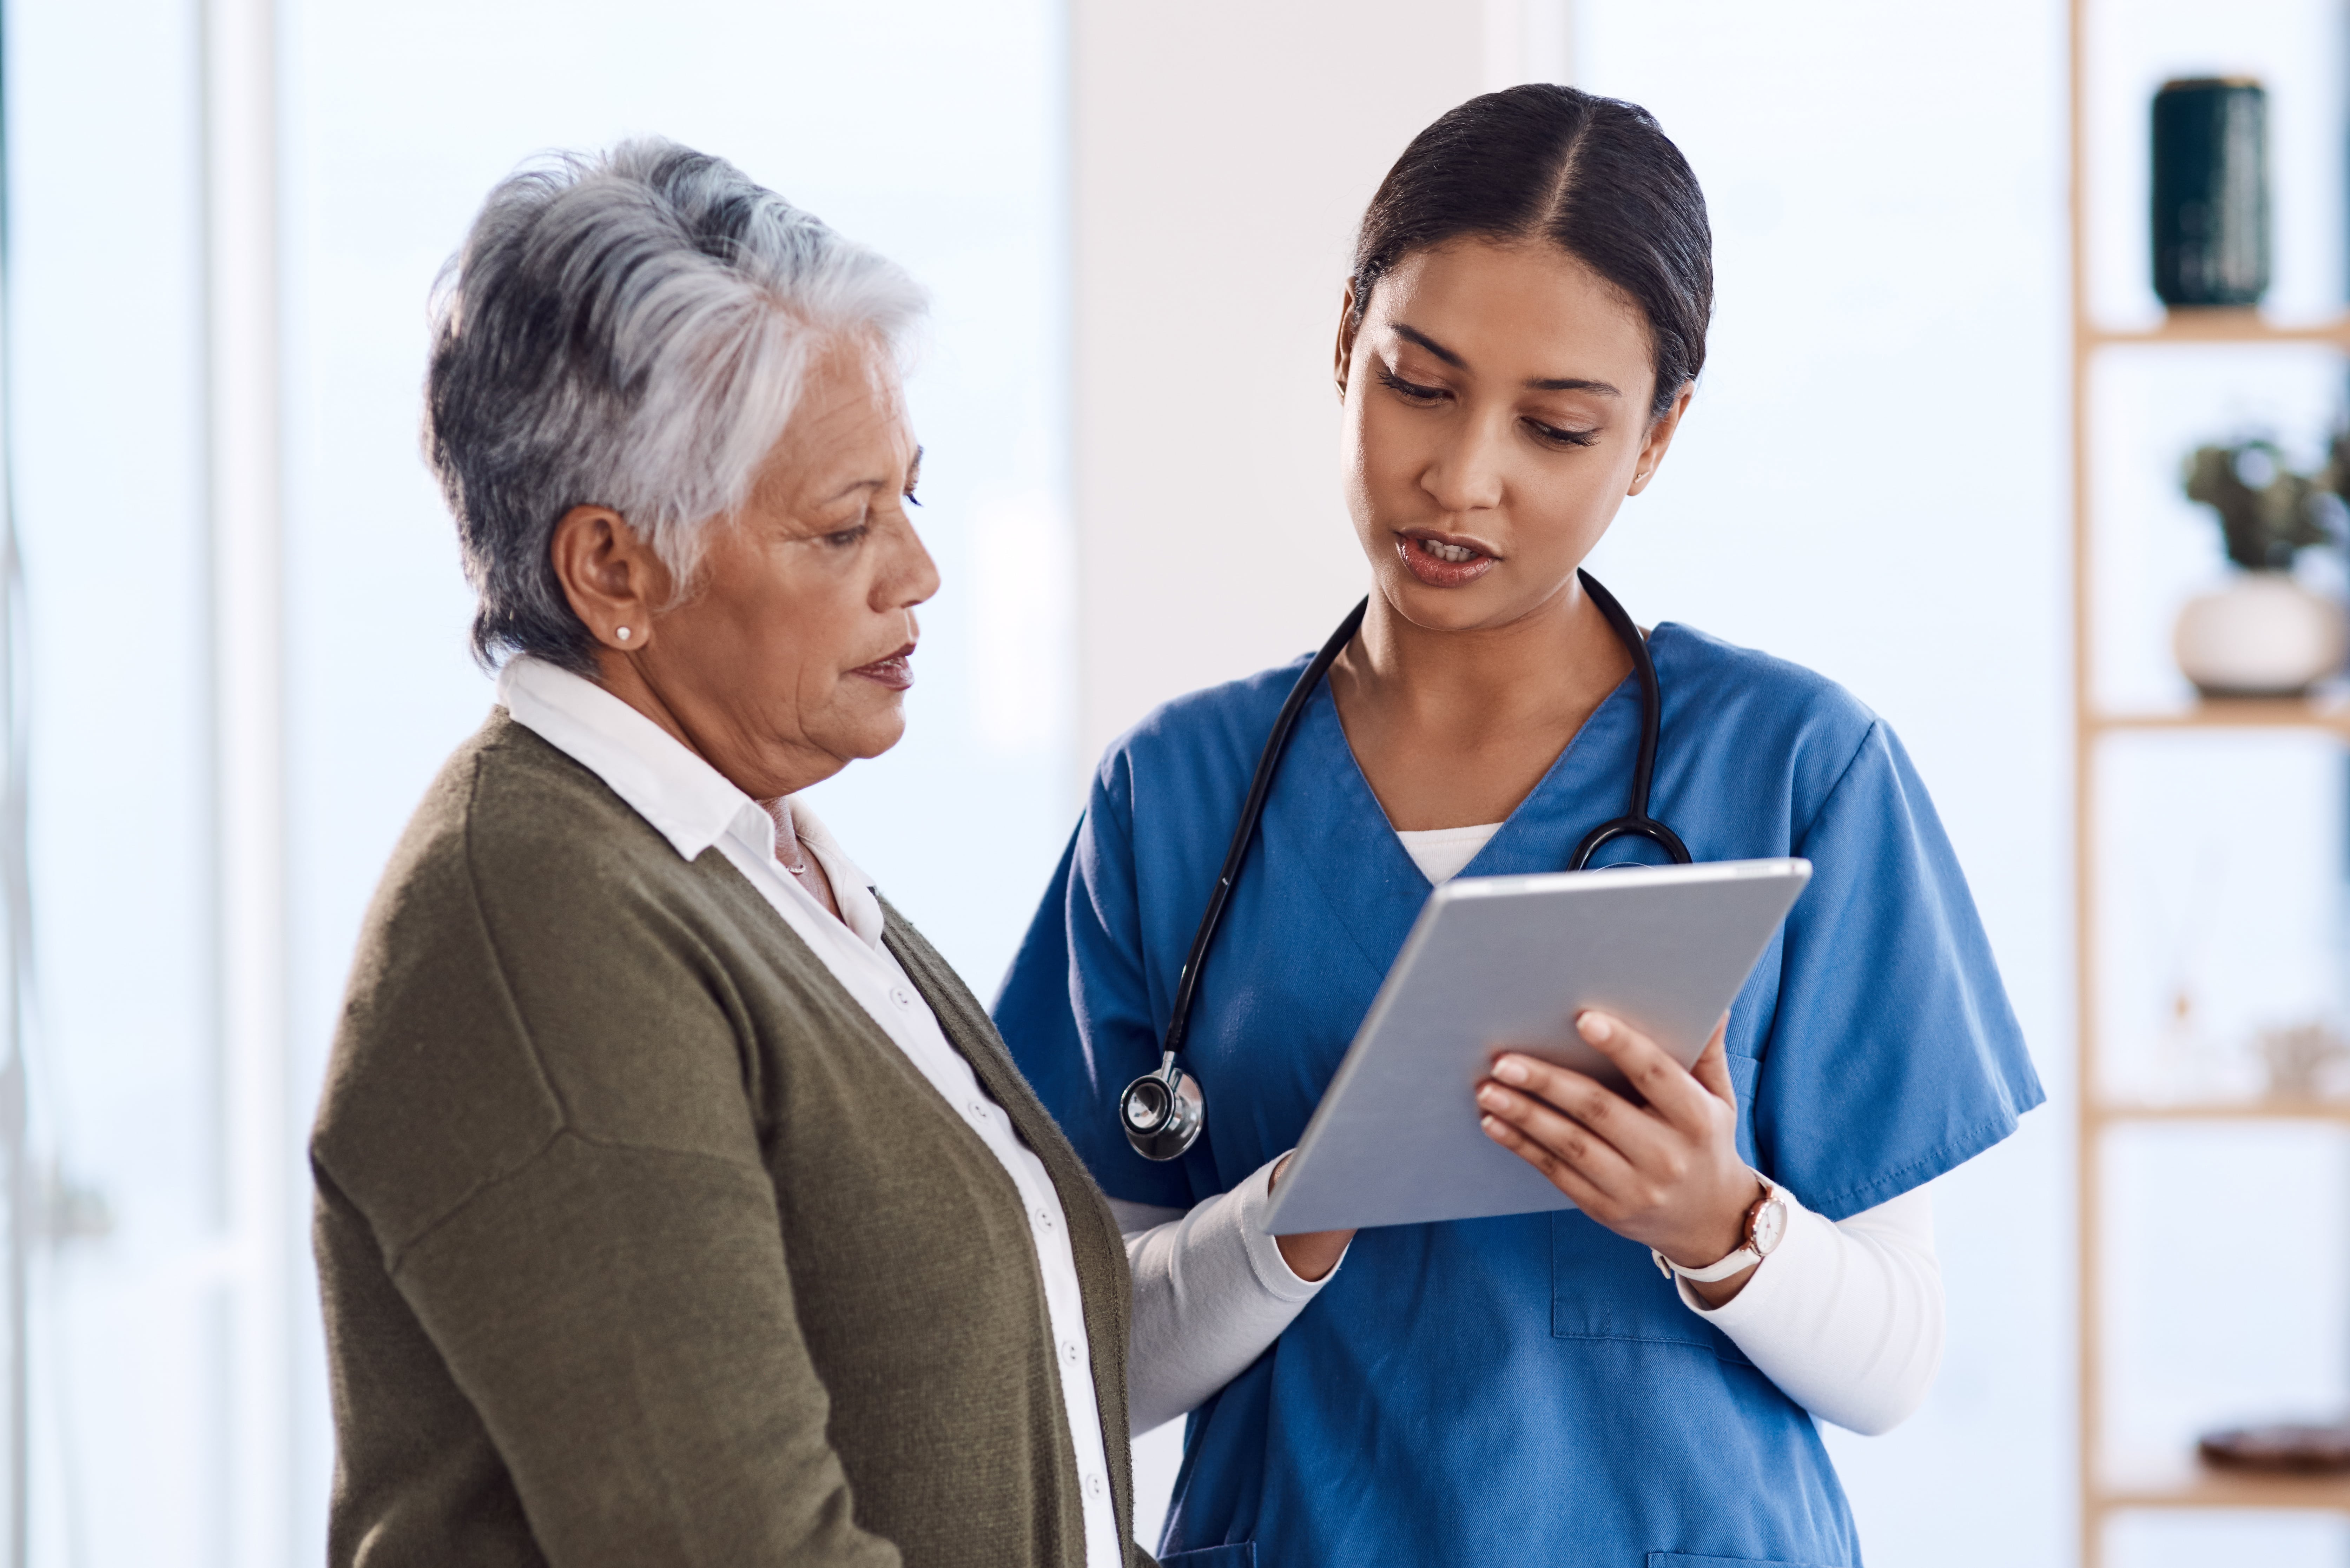 Implementing Value-Based Care With Annual Wellness Visits (AWV)